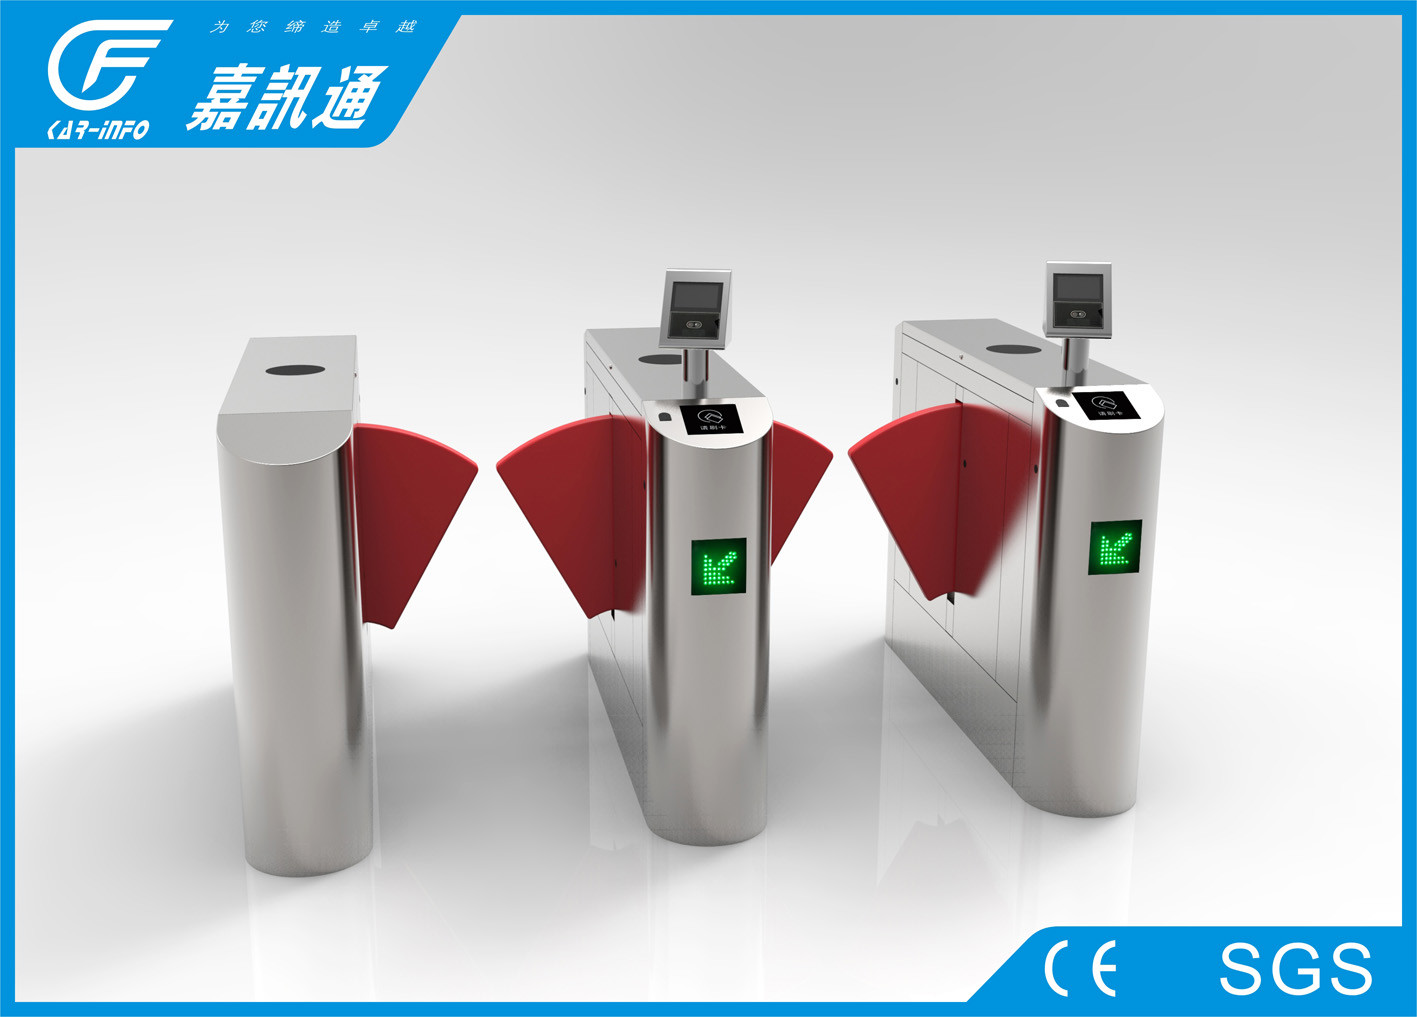 Biometric Flap Barrier System For Entrance Access Control , Park Turnstile Entry Systems